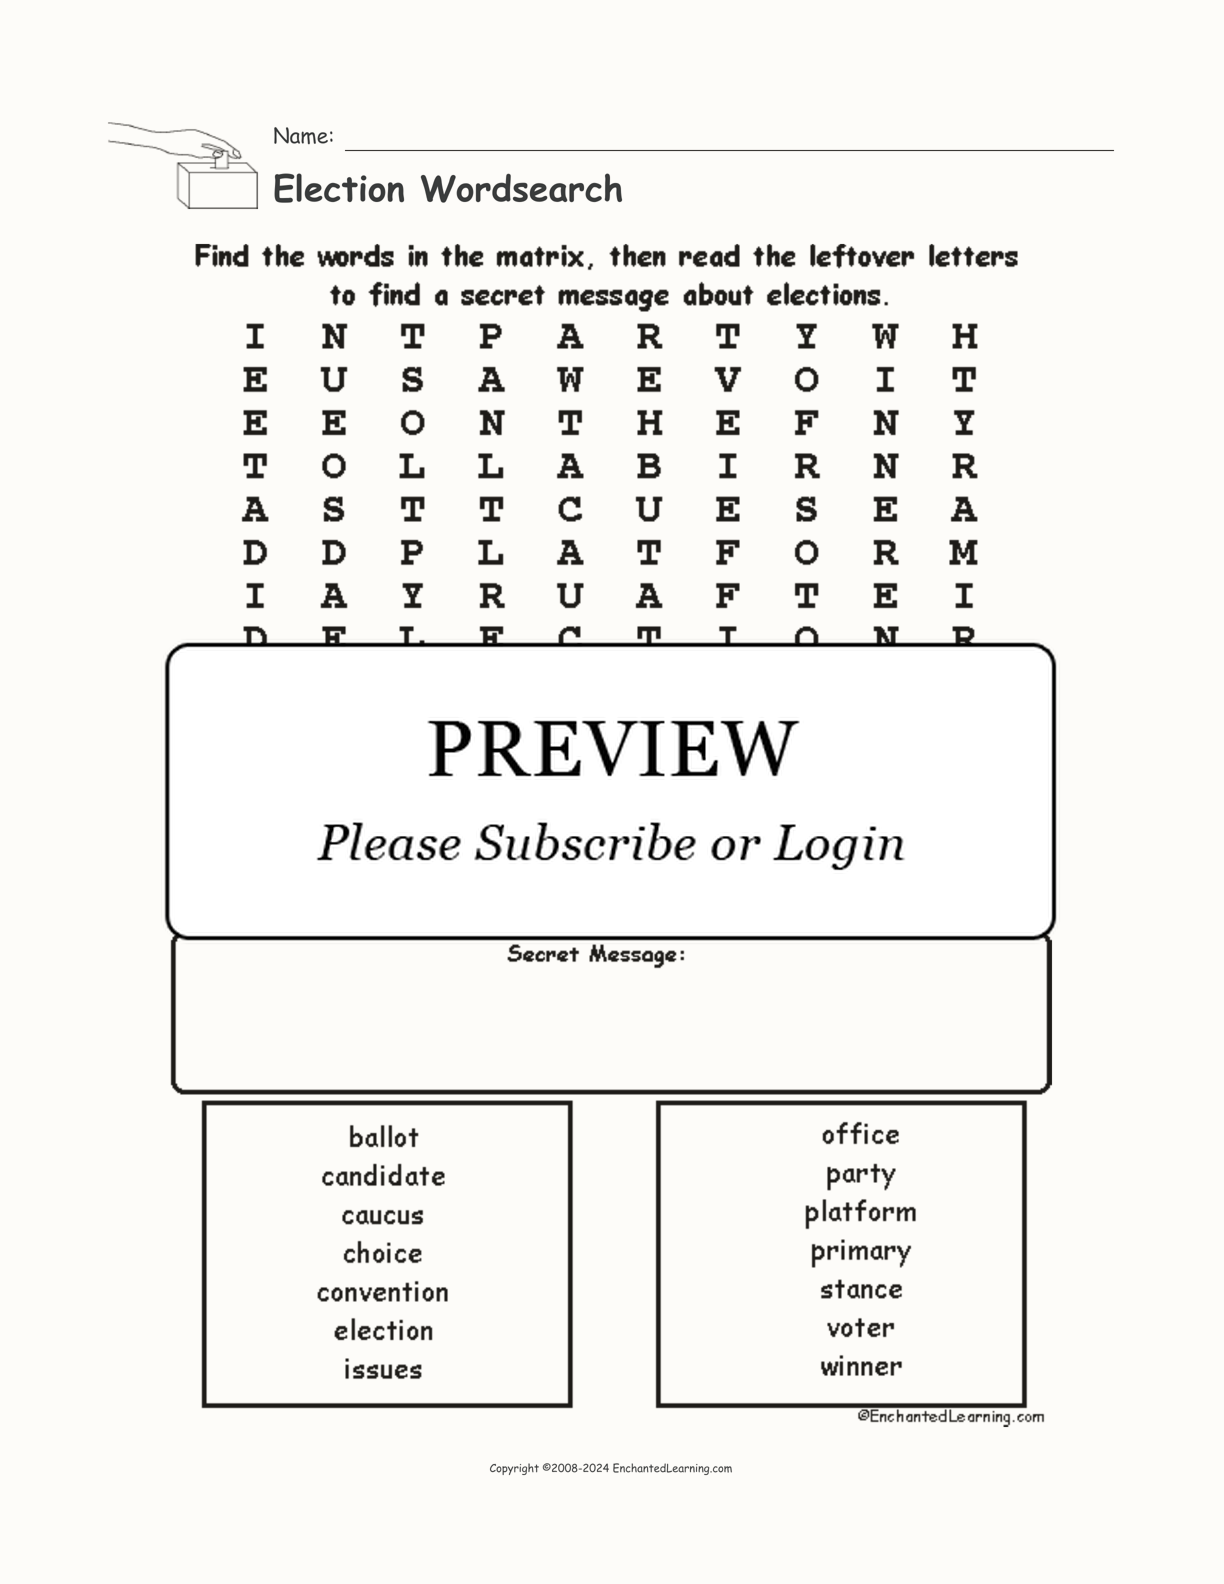 Election Wordsearch interactive worksheet page 1